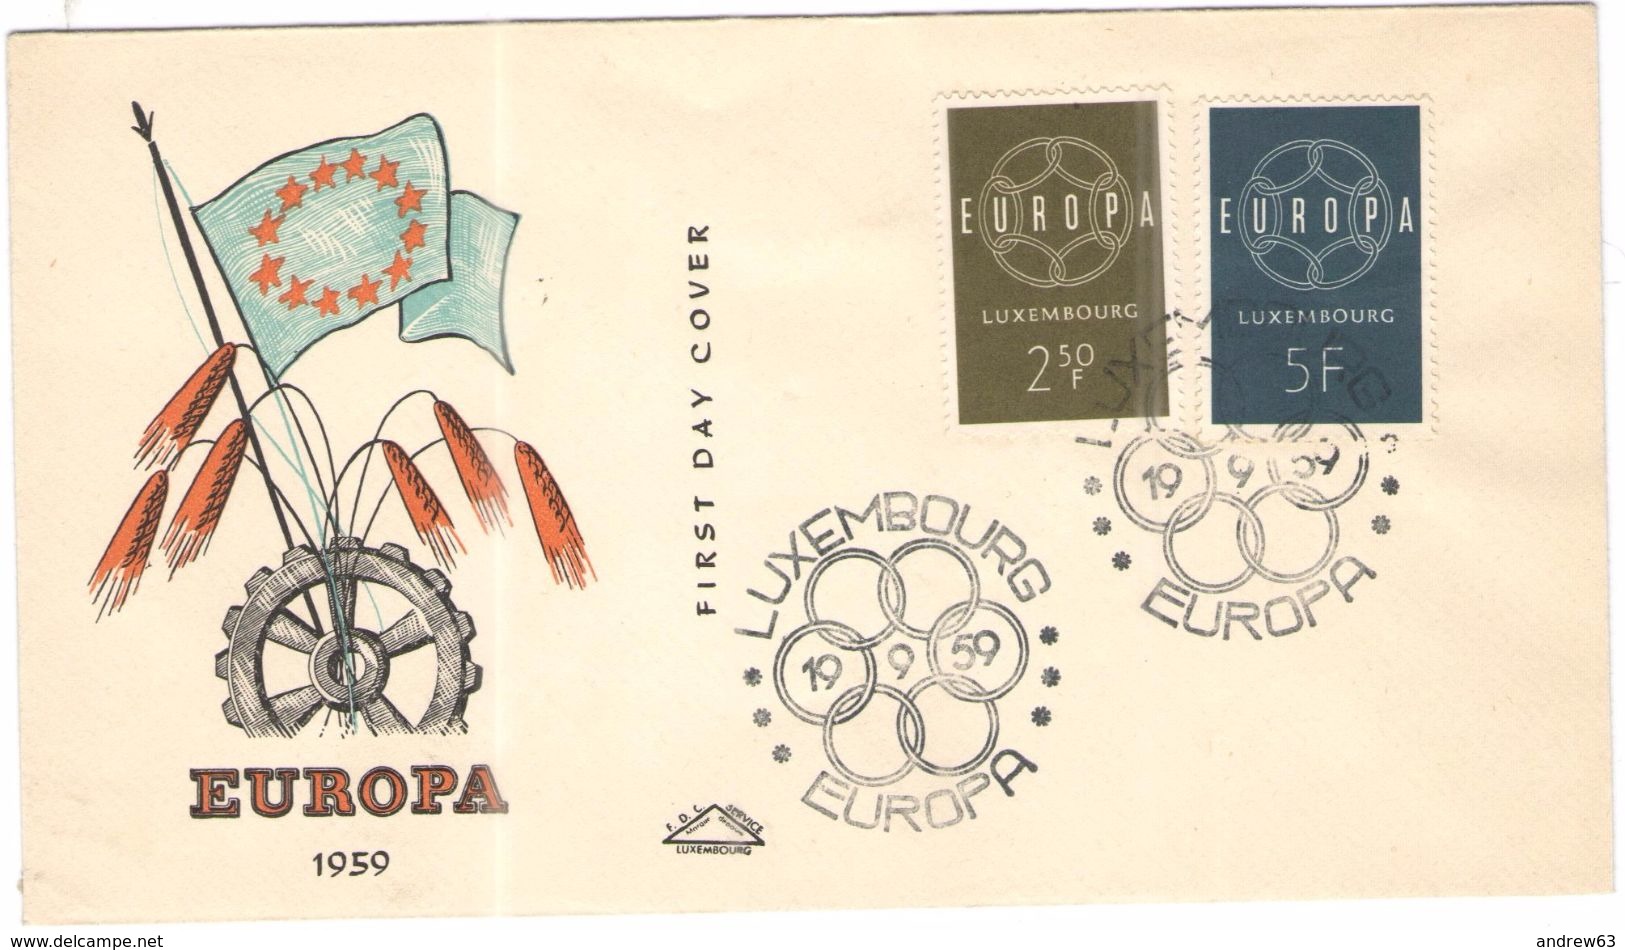 LUSSEMBURGO - LUXEMBOURG - 1959 - Europa Cept - FDC - FDC